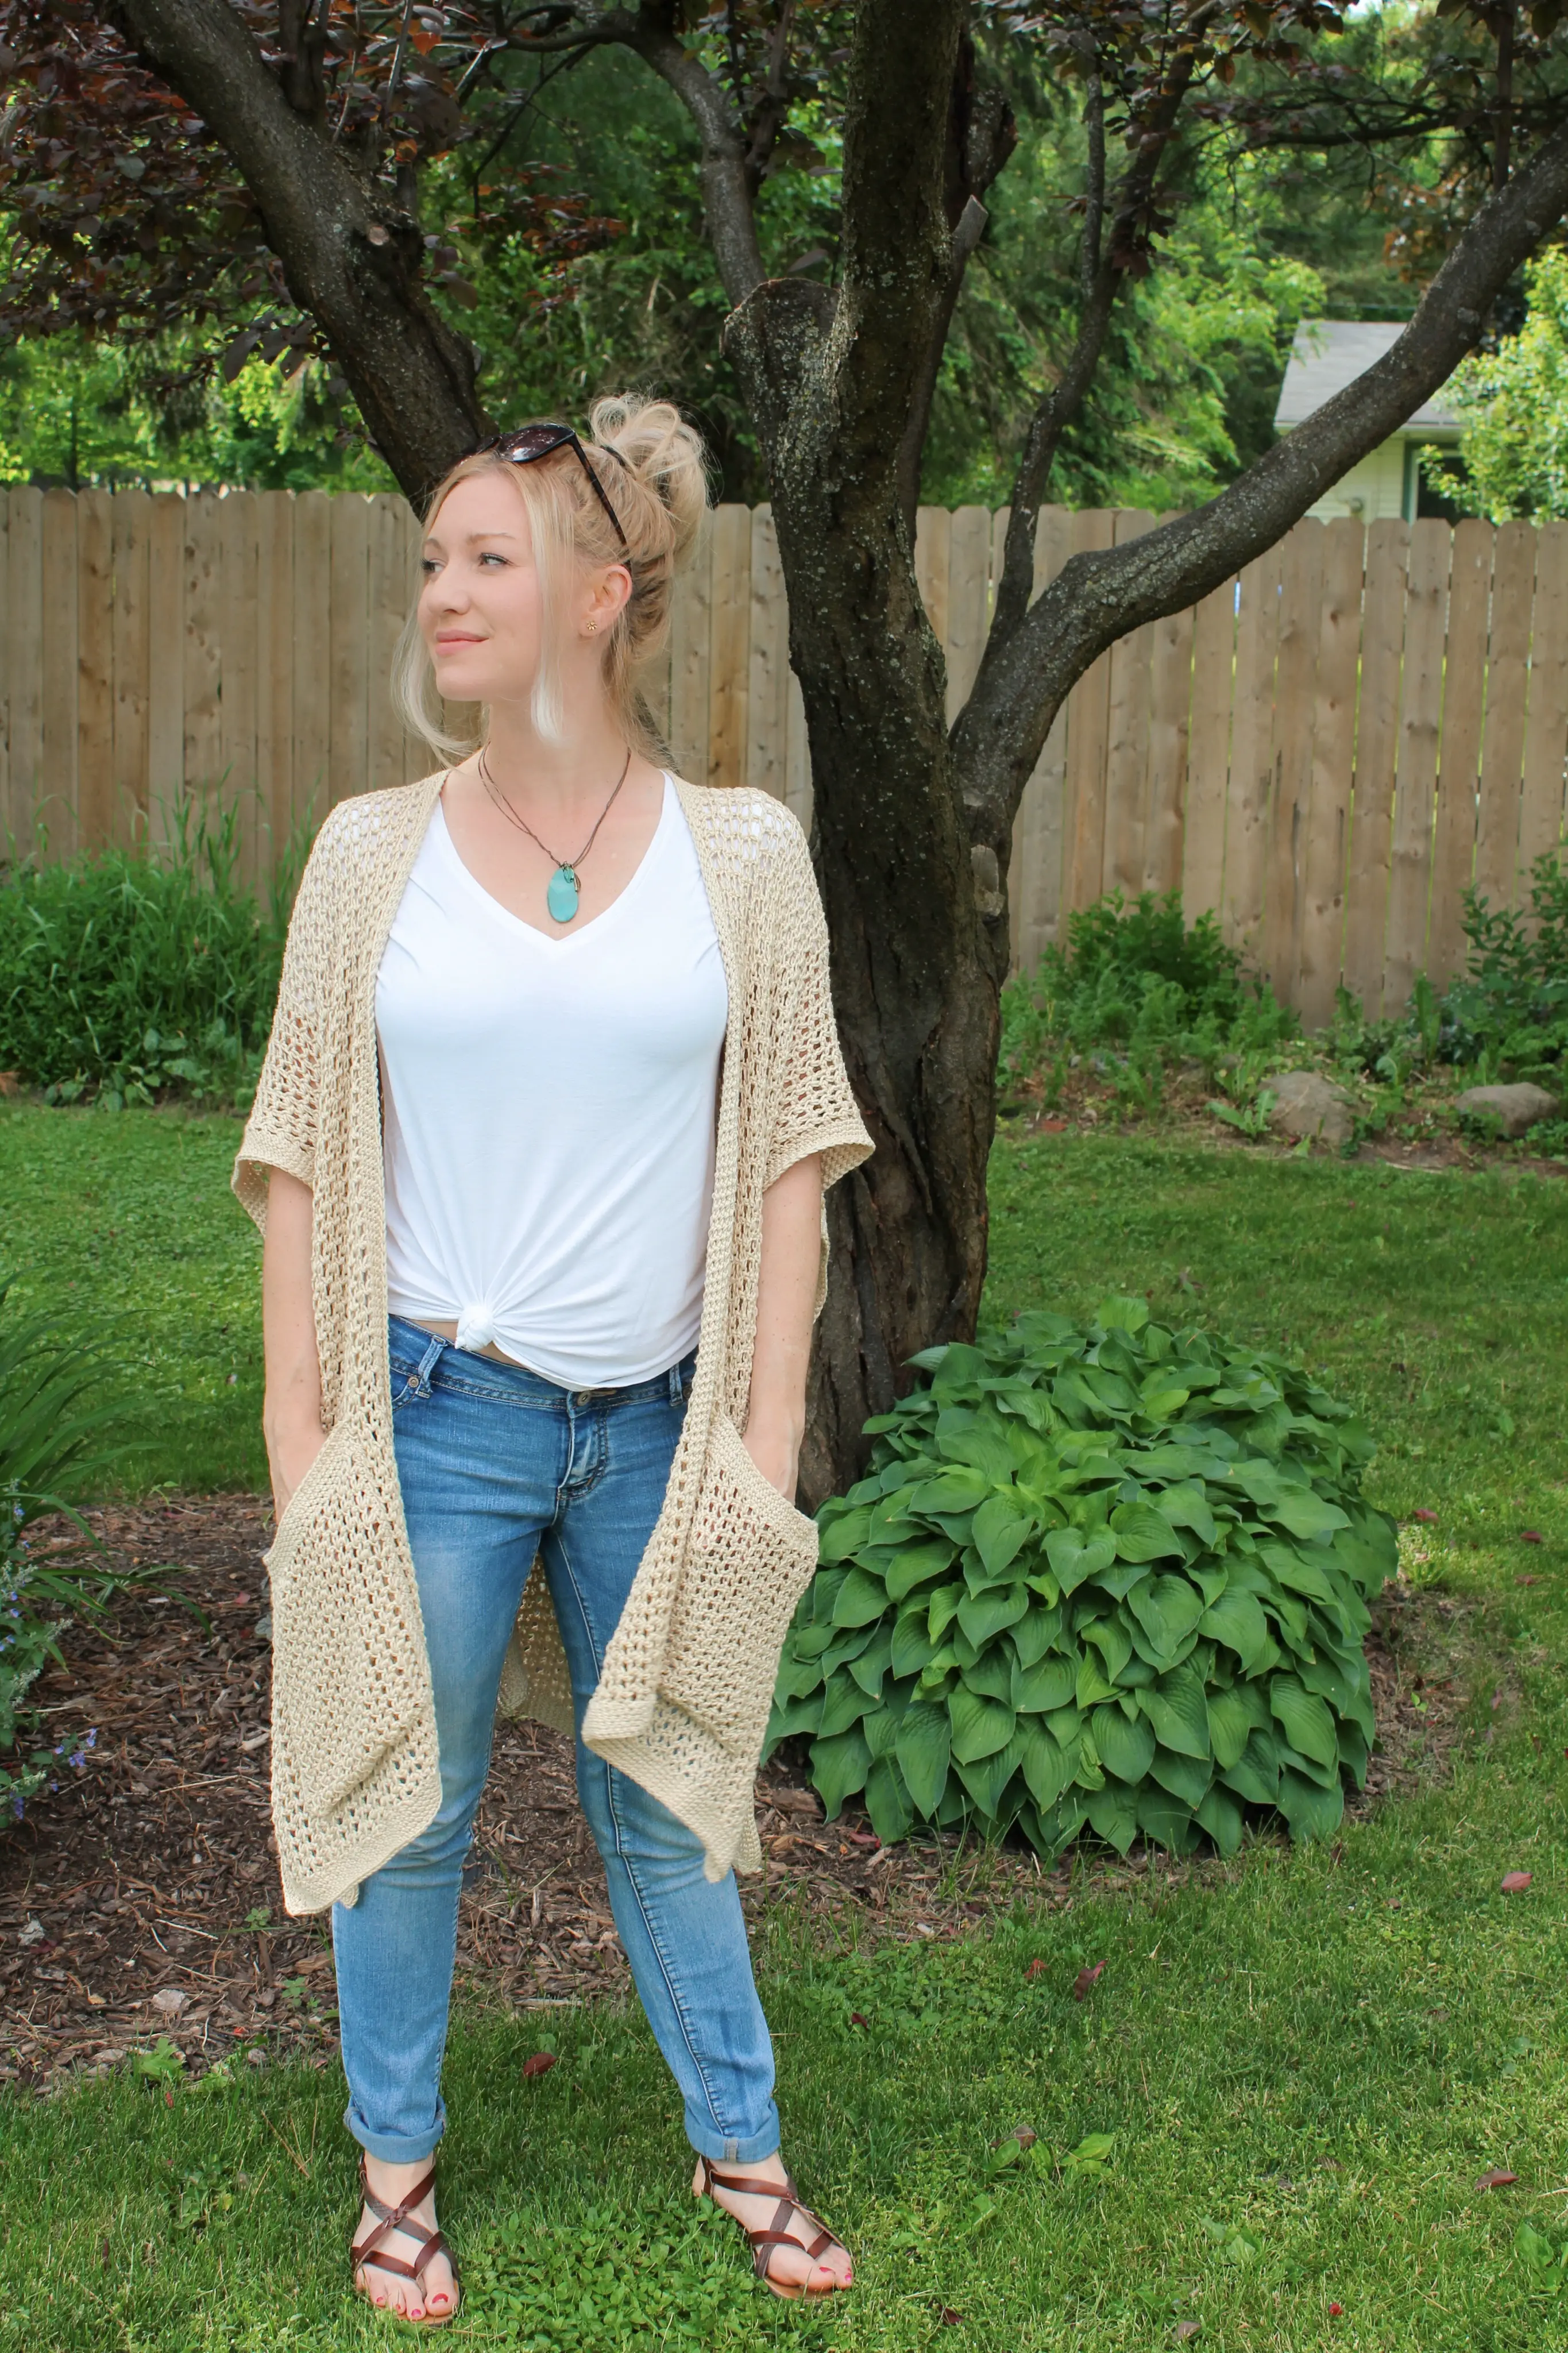 Magnolia Summer Cardigan Crochet Pattern   Free   The Knotted Nest